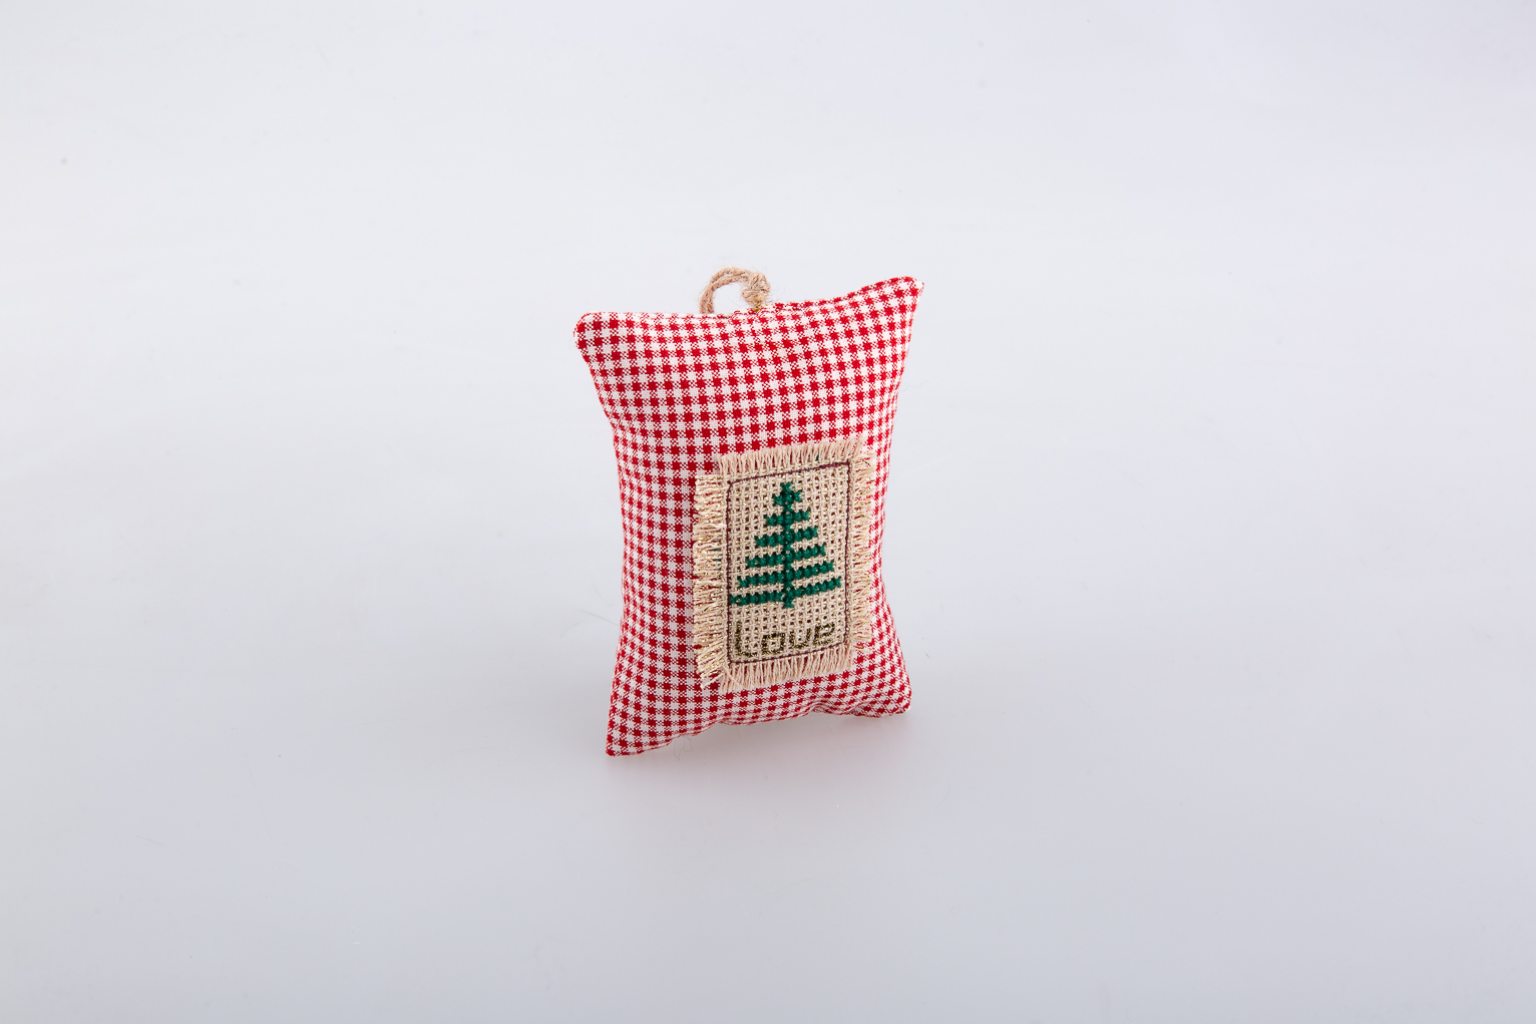 Hand-embroidered lucky charm with Christmas tree